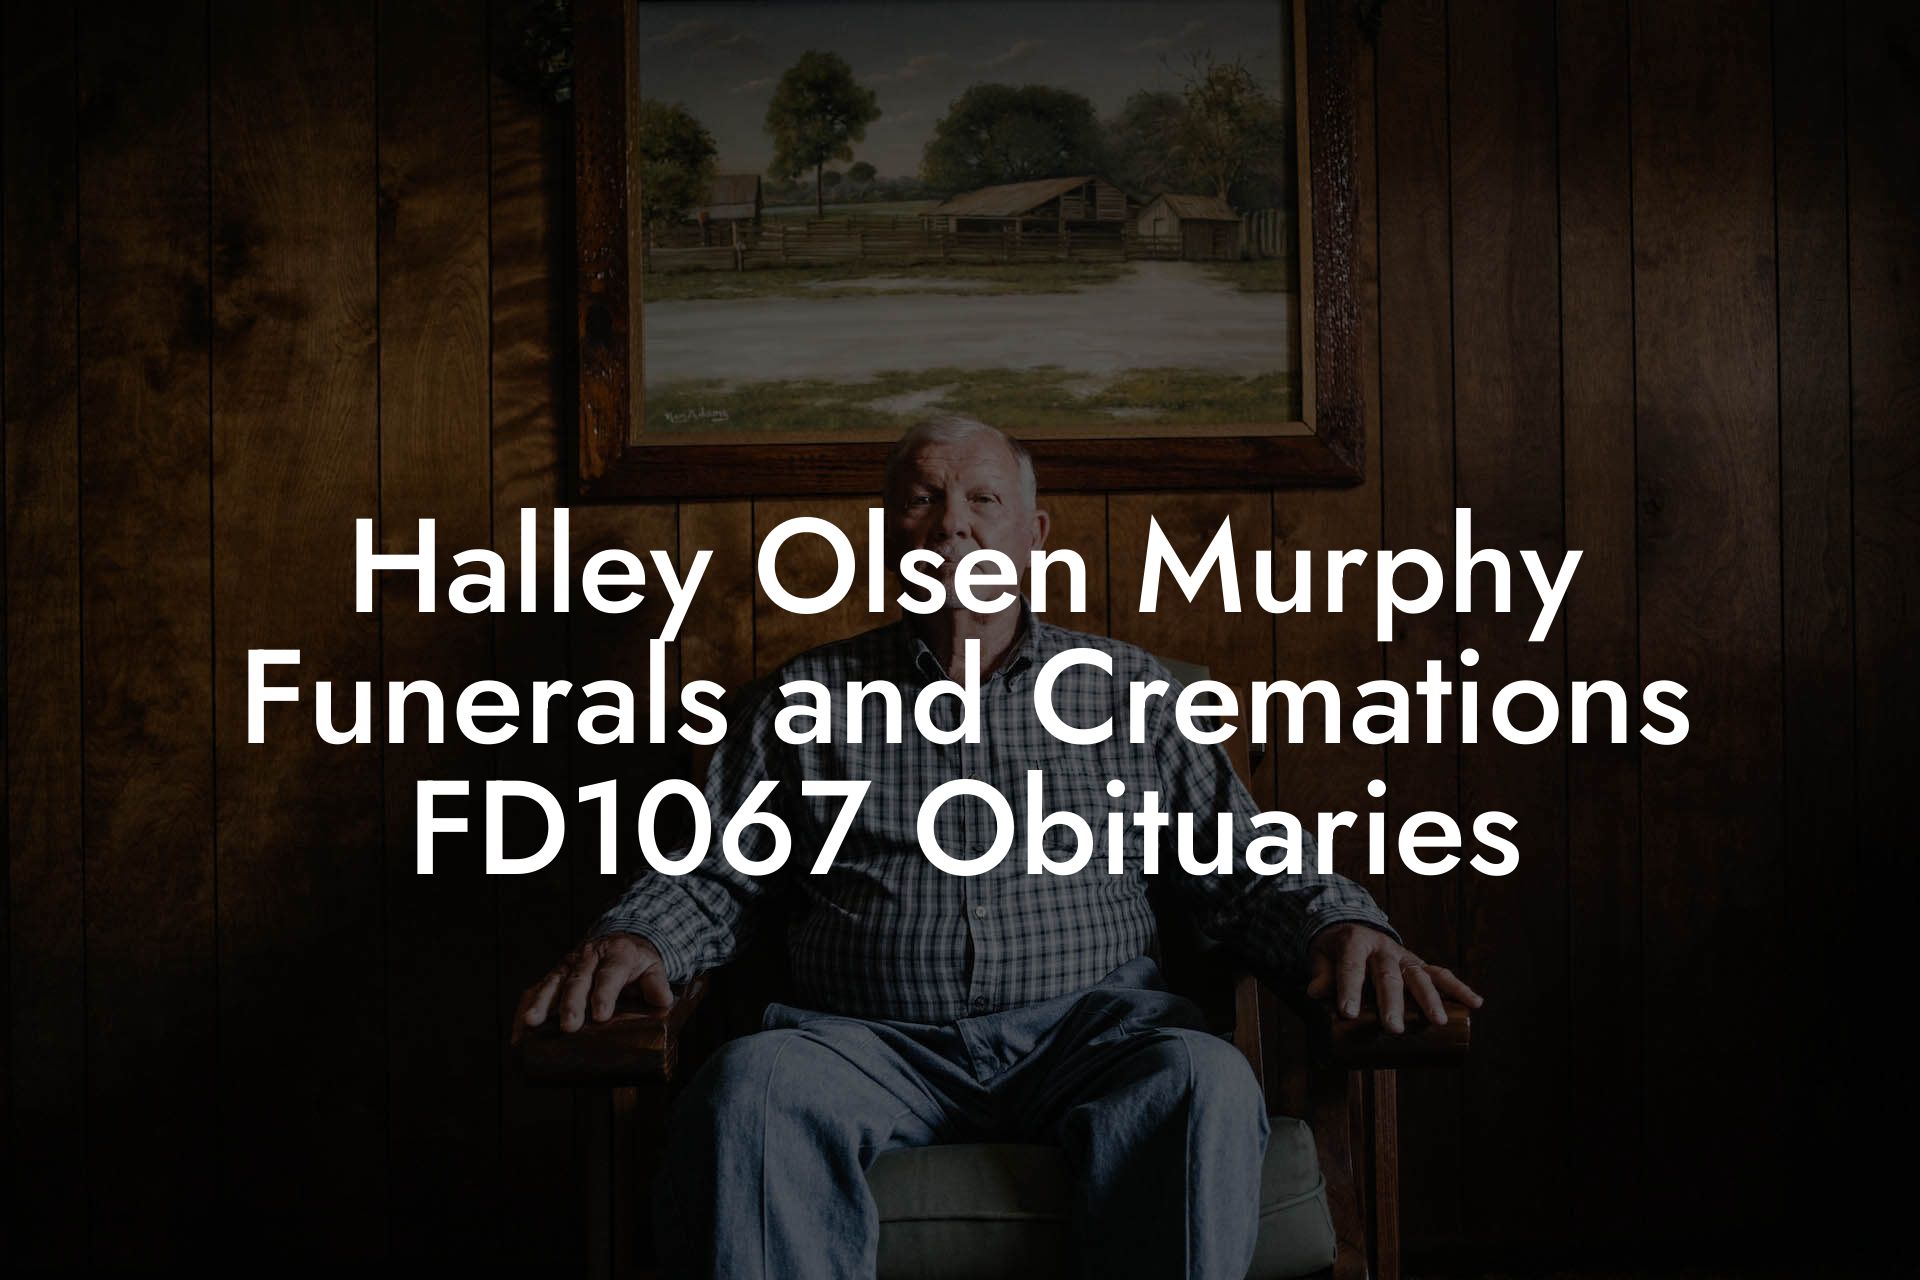 Halley Olsen Murphy Funerals and Cremations    FD1067 Obituaries